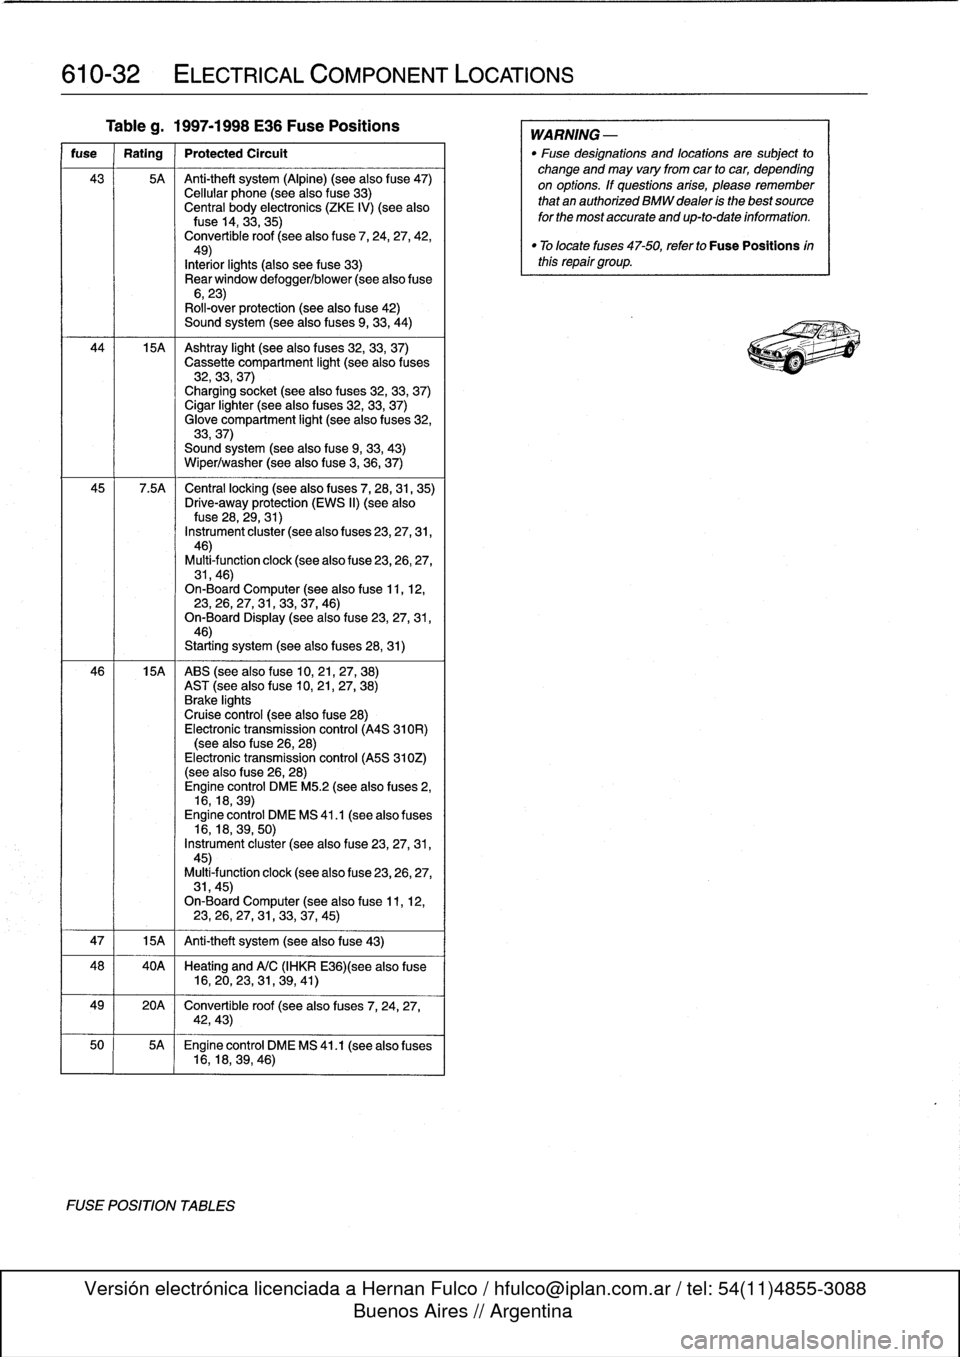 BMW 325i 1992 E36 Service Manual 
610-32

	

ELECTRICAL
COMPONENT
LOCATIONS

Tableg
.
1997-1998
E36
Fuse
Positions

fuse

	

Rating

	

Protected
Circult

43

	

5A

	

Anti-theft
system
(Alpine)
(see
also
f
use47)
Cellular
phone
(se